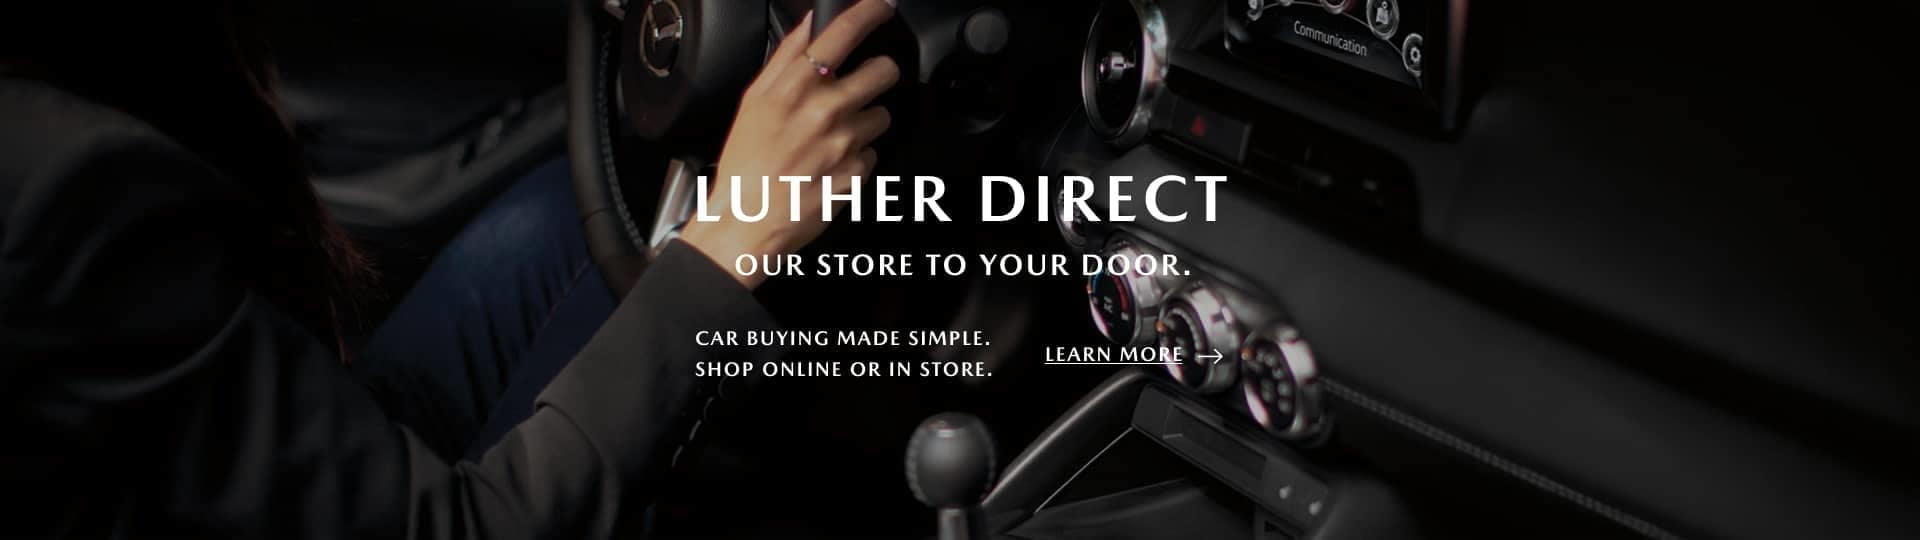 luther-direct-di-slider-1920x540